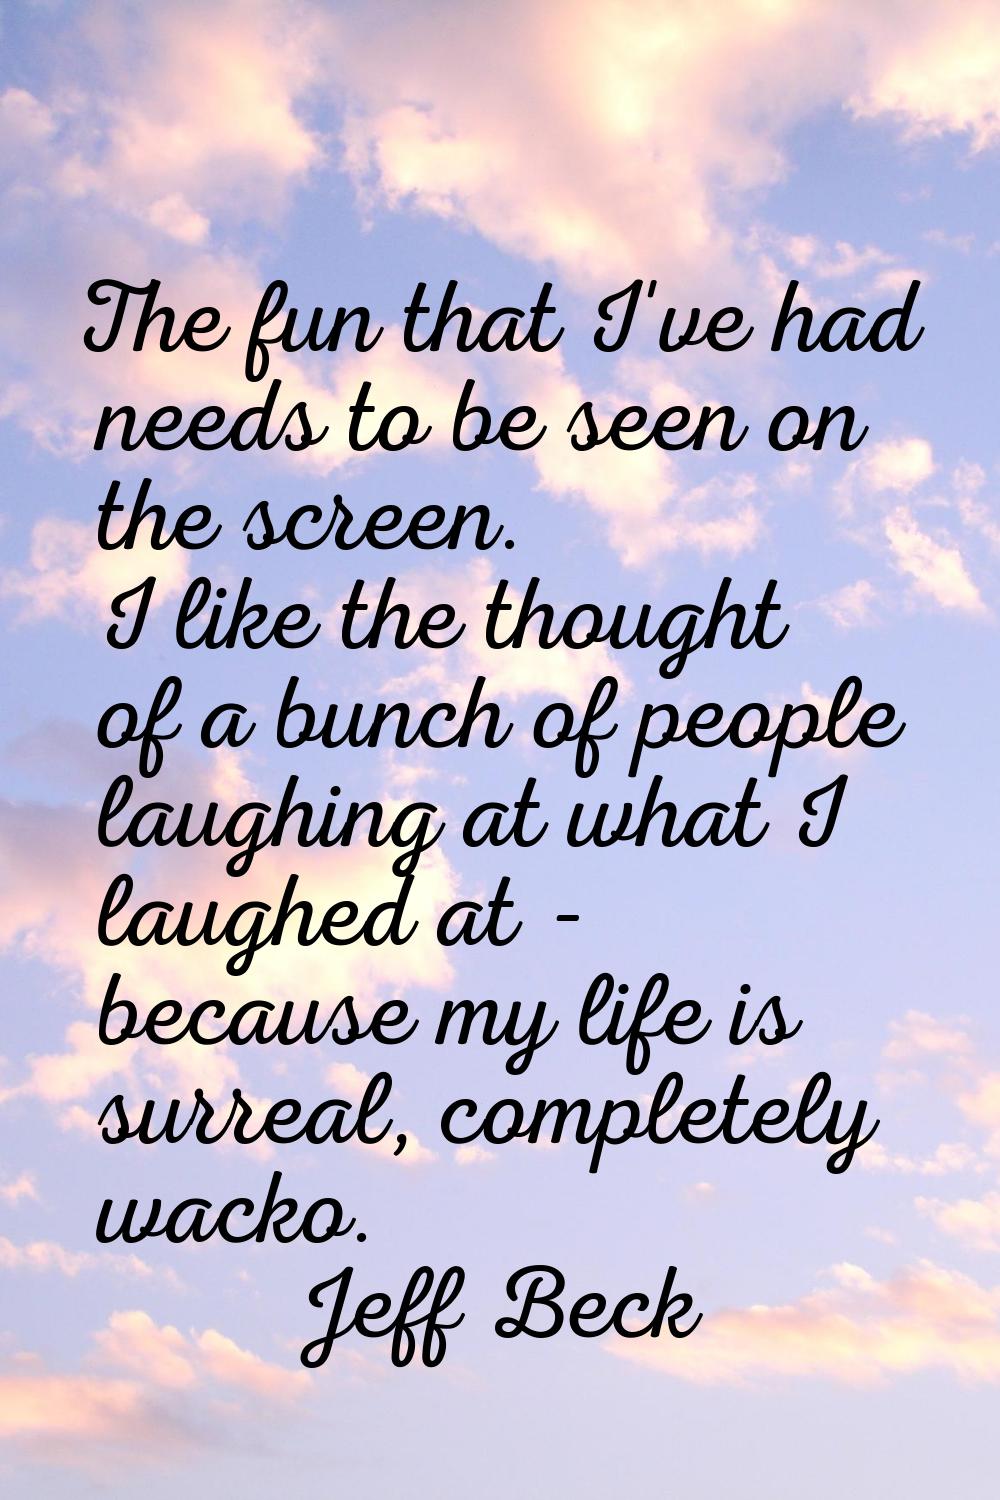 The fun that I've had needs to be seen on the screen. I like the thought of a bunch of people laugh